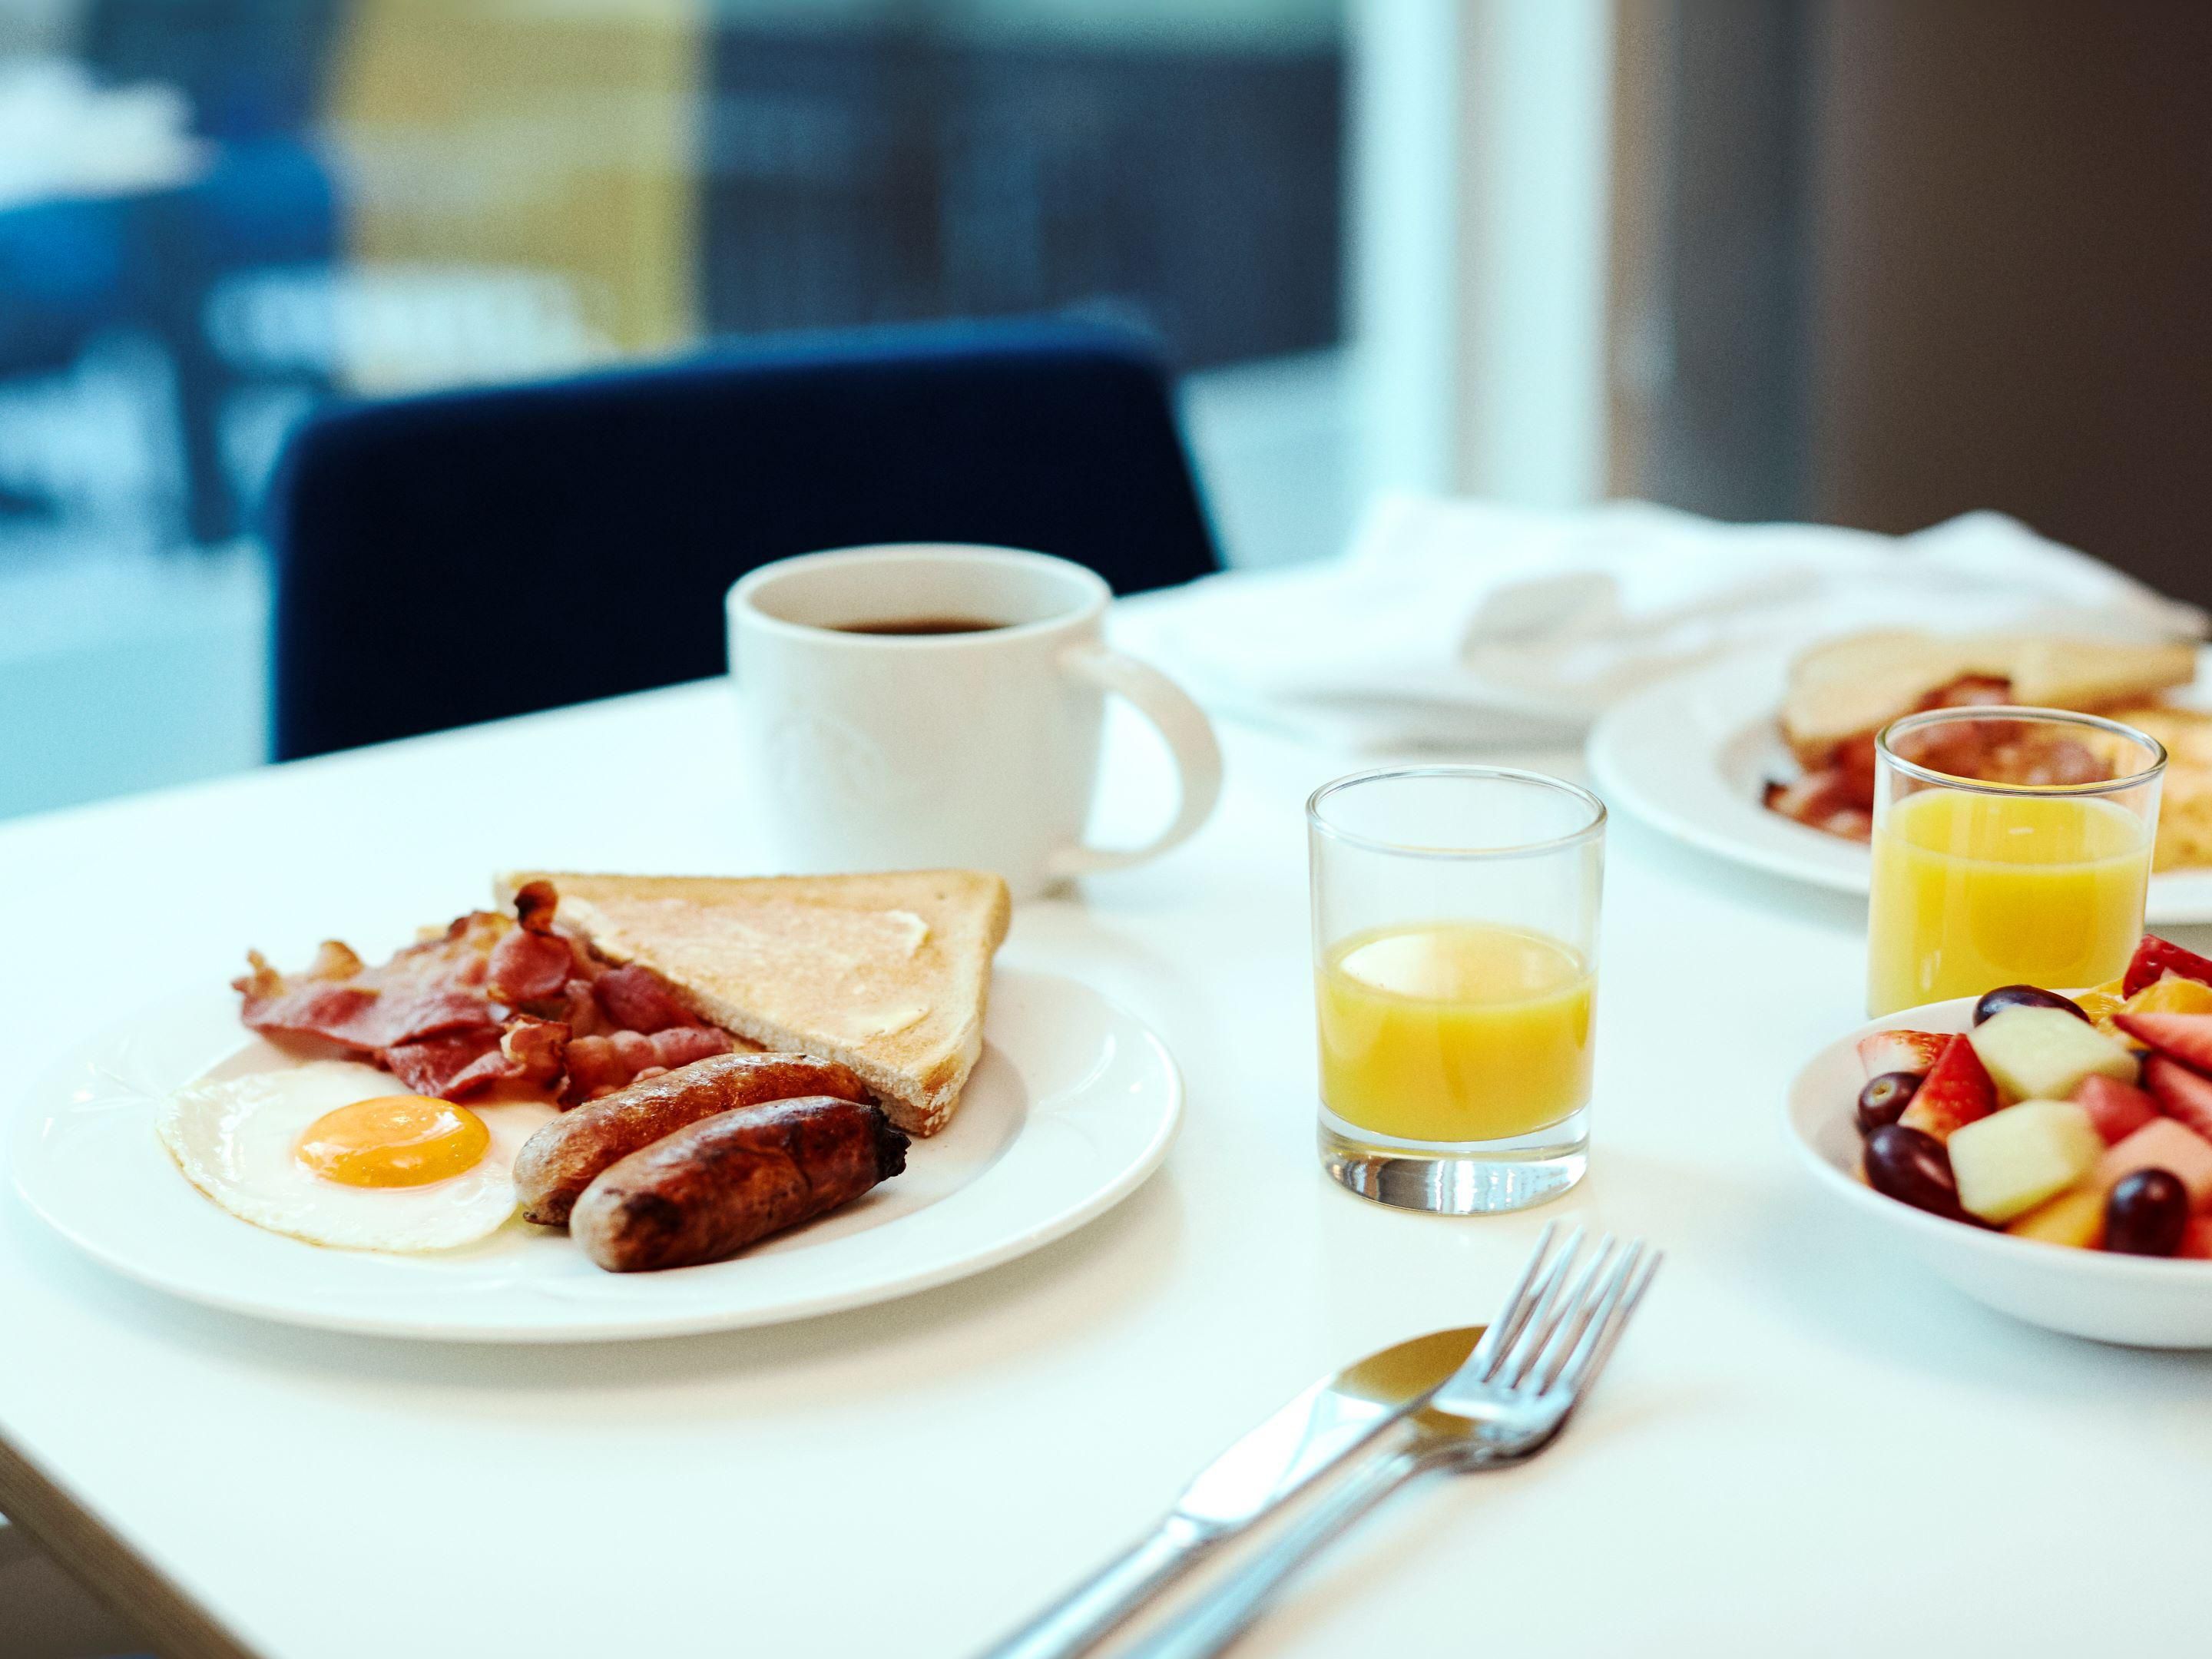 Start the morning with our breakfast served daily, featuring a range of delicious hot and cold items sure to please everyone.